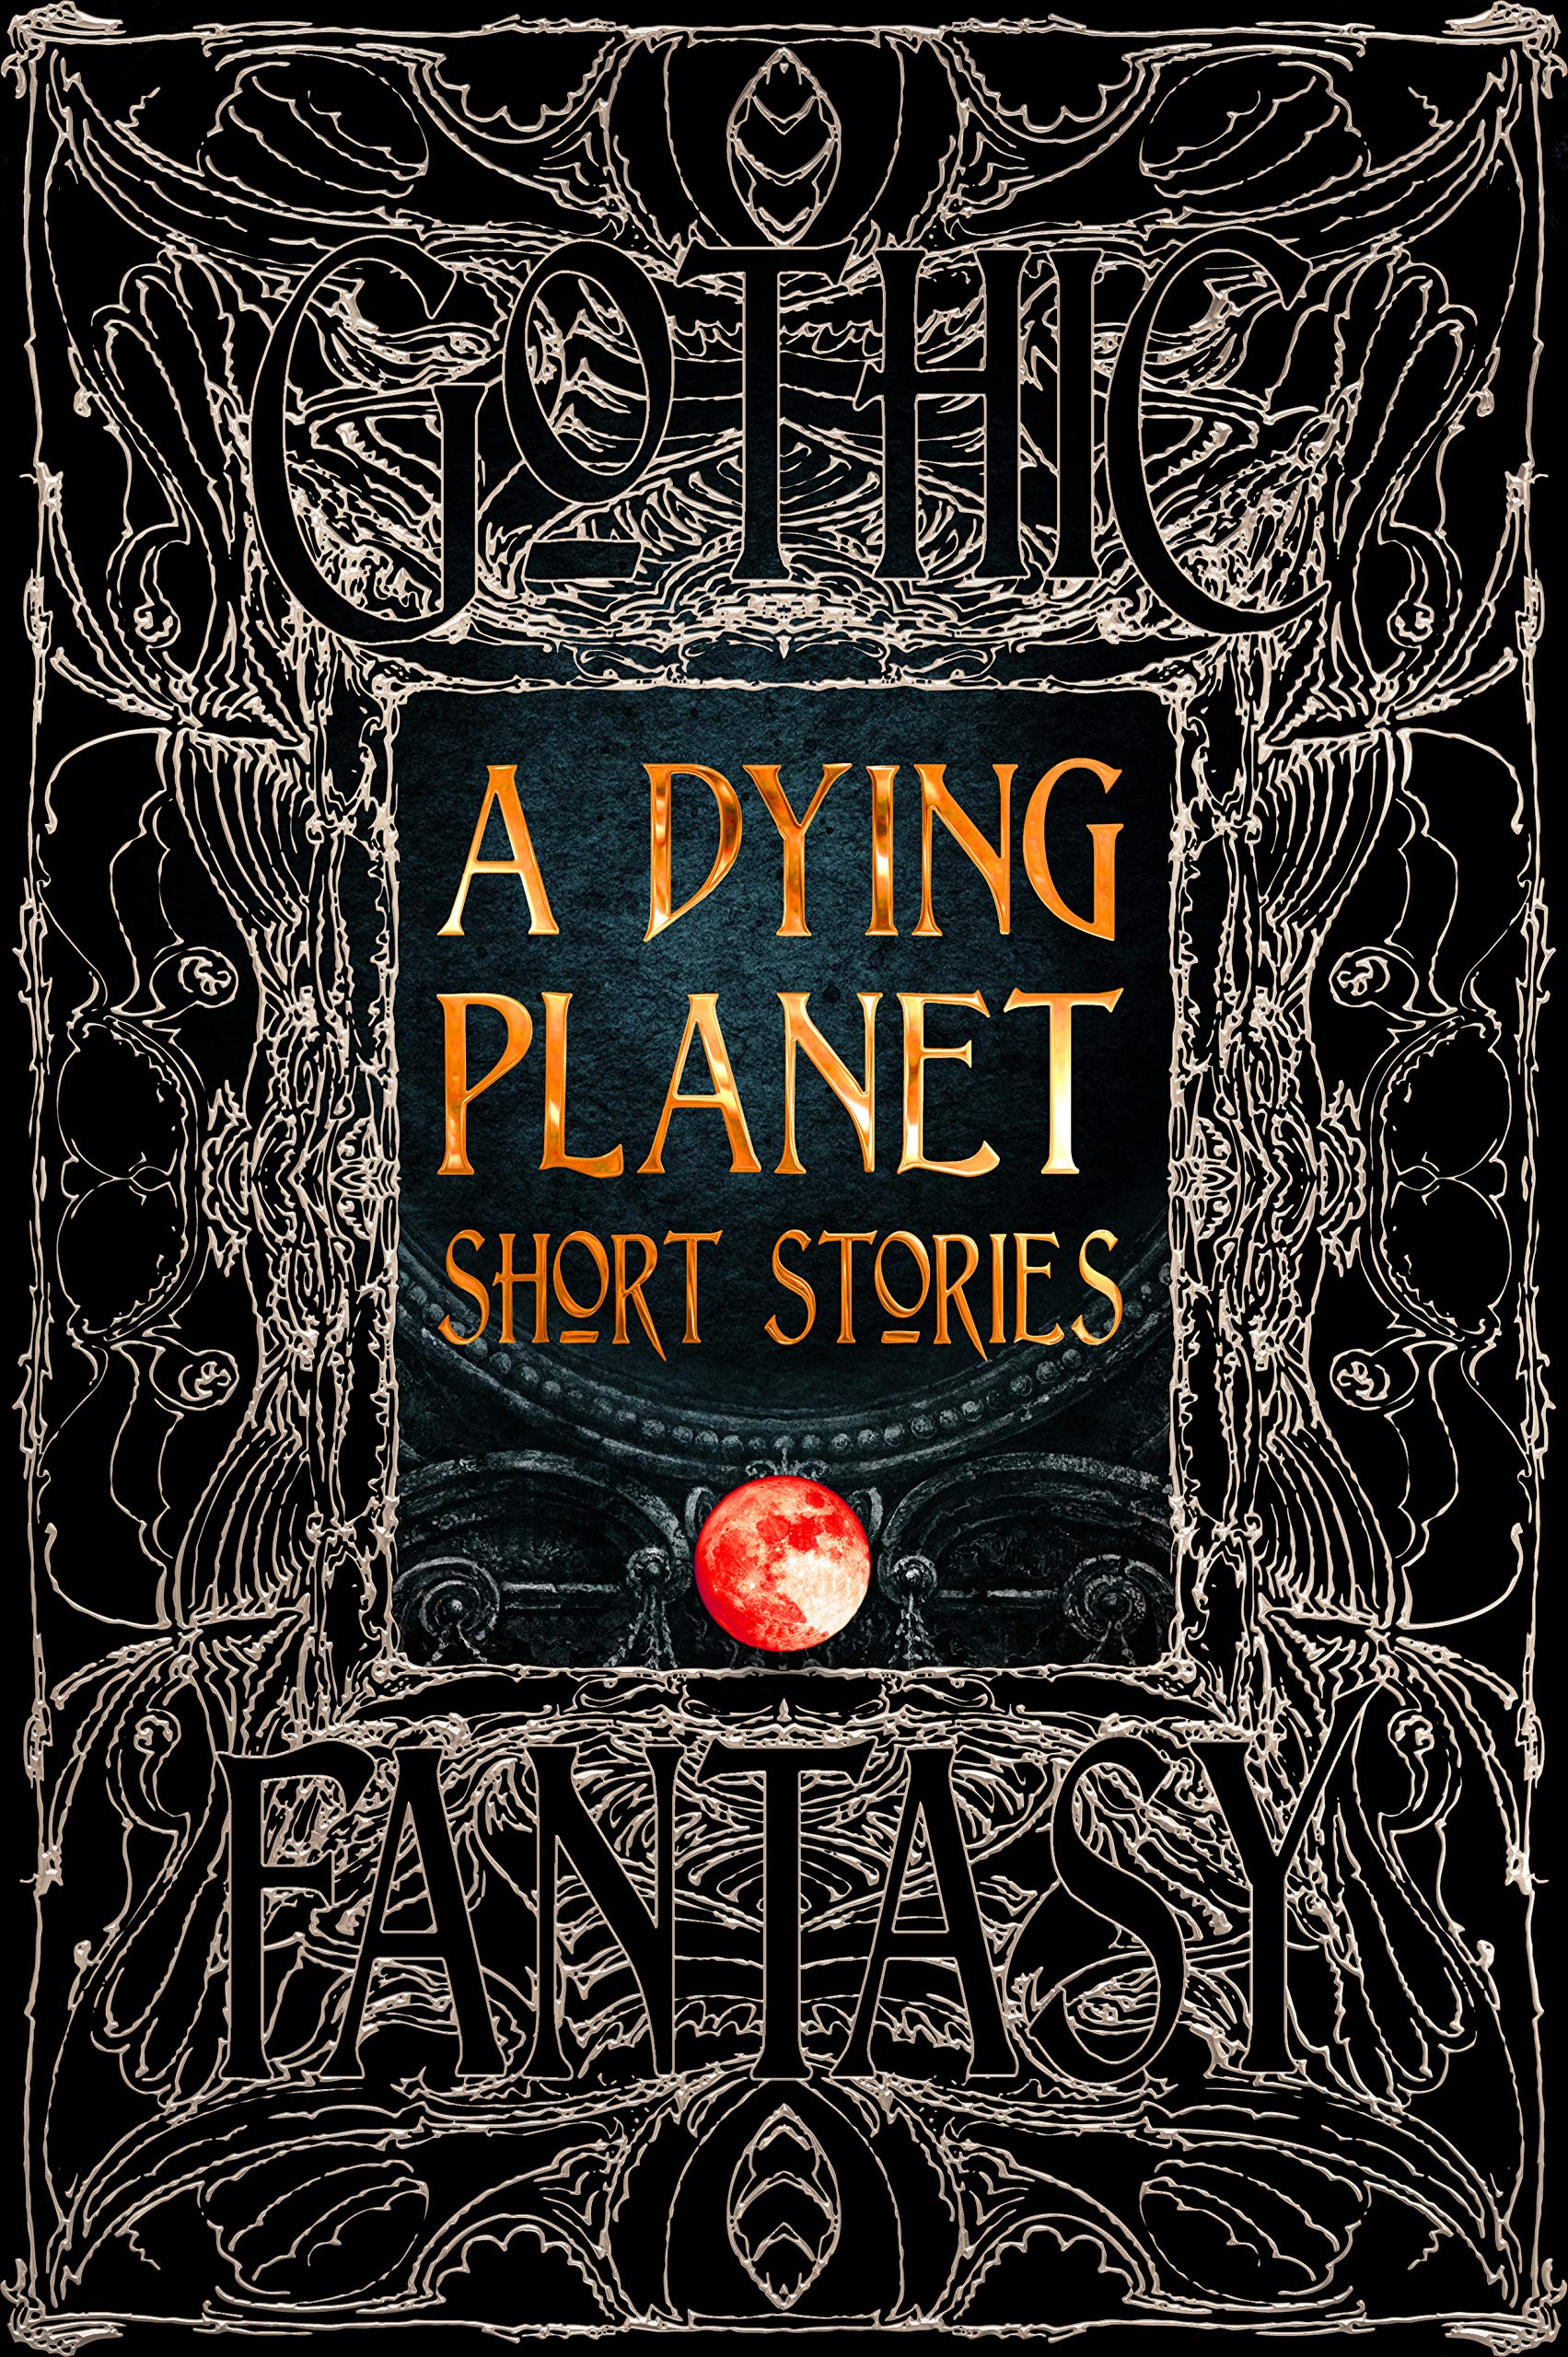 Dying Planet Short Stories